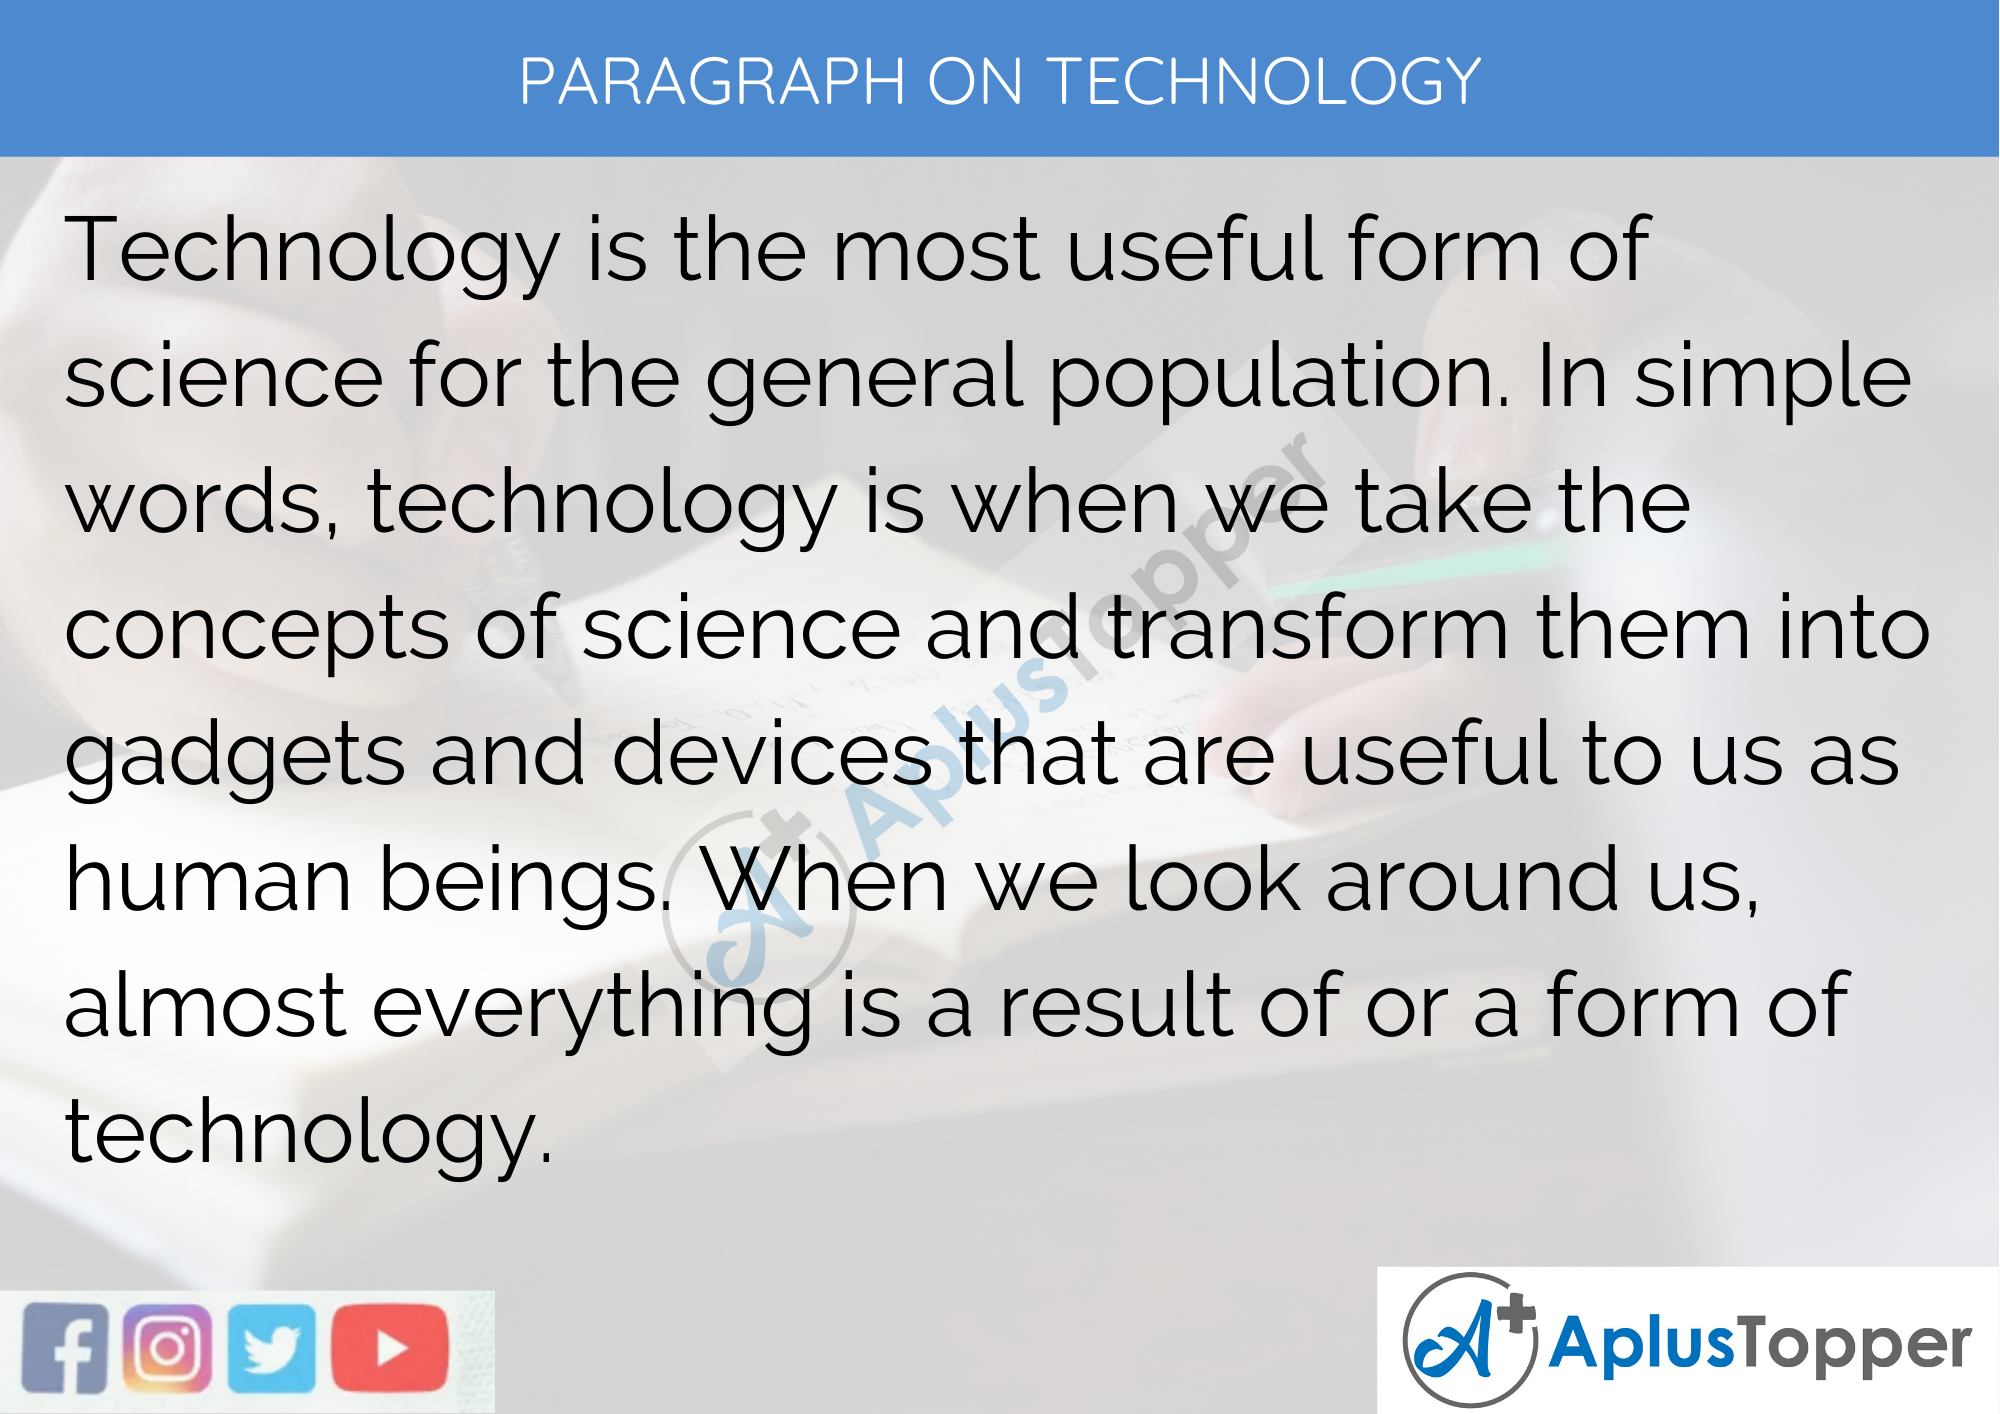 paragraph about technology